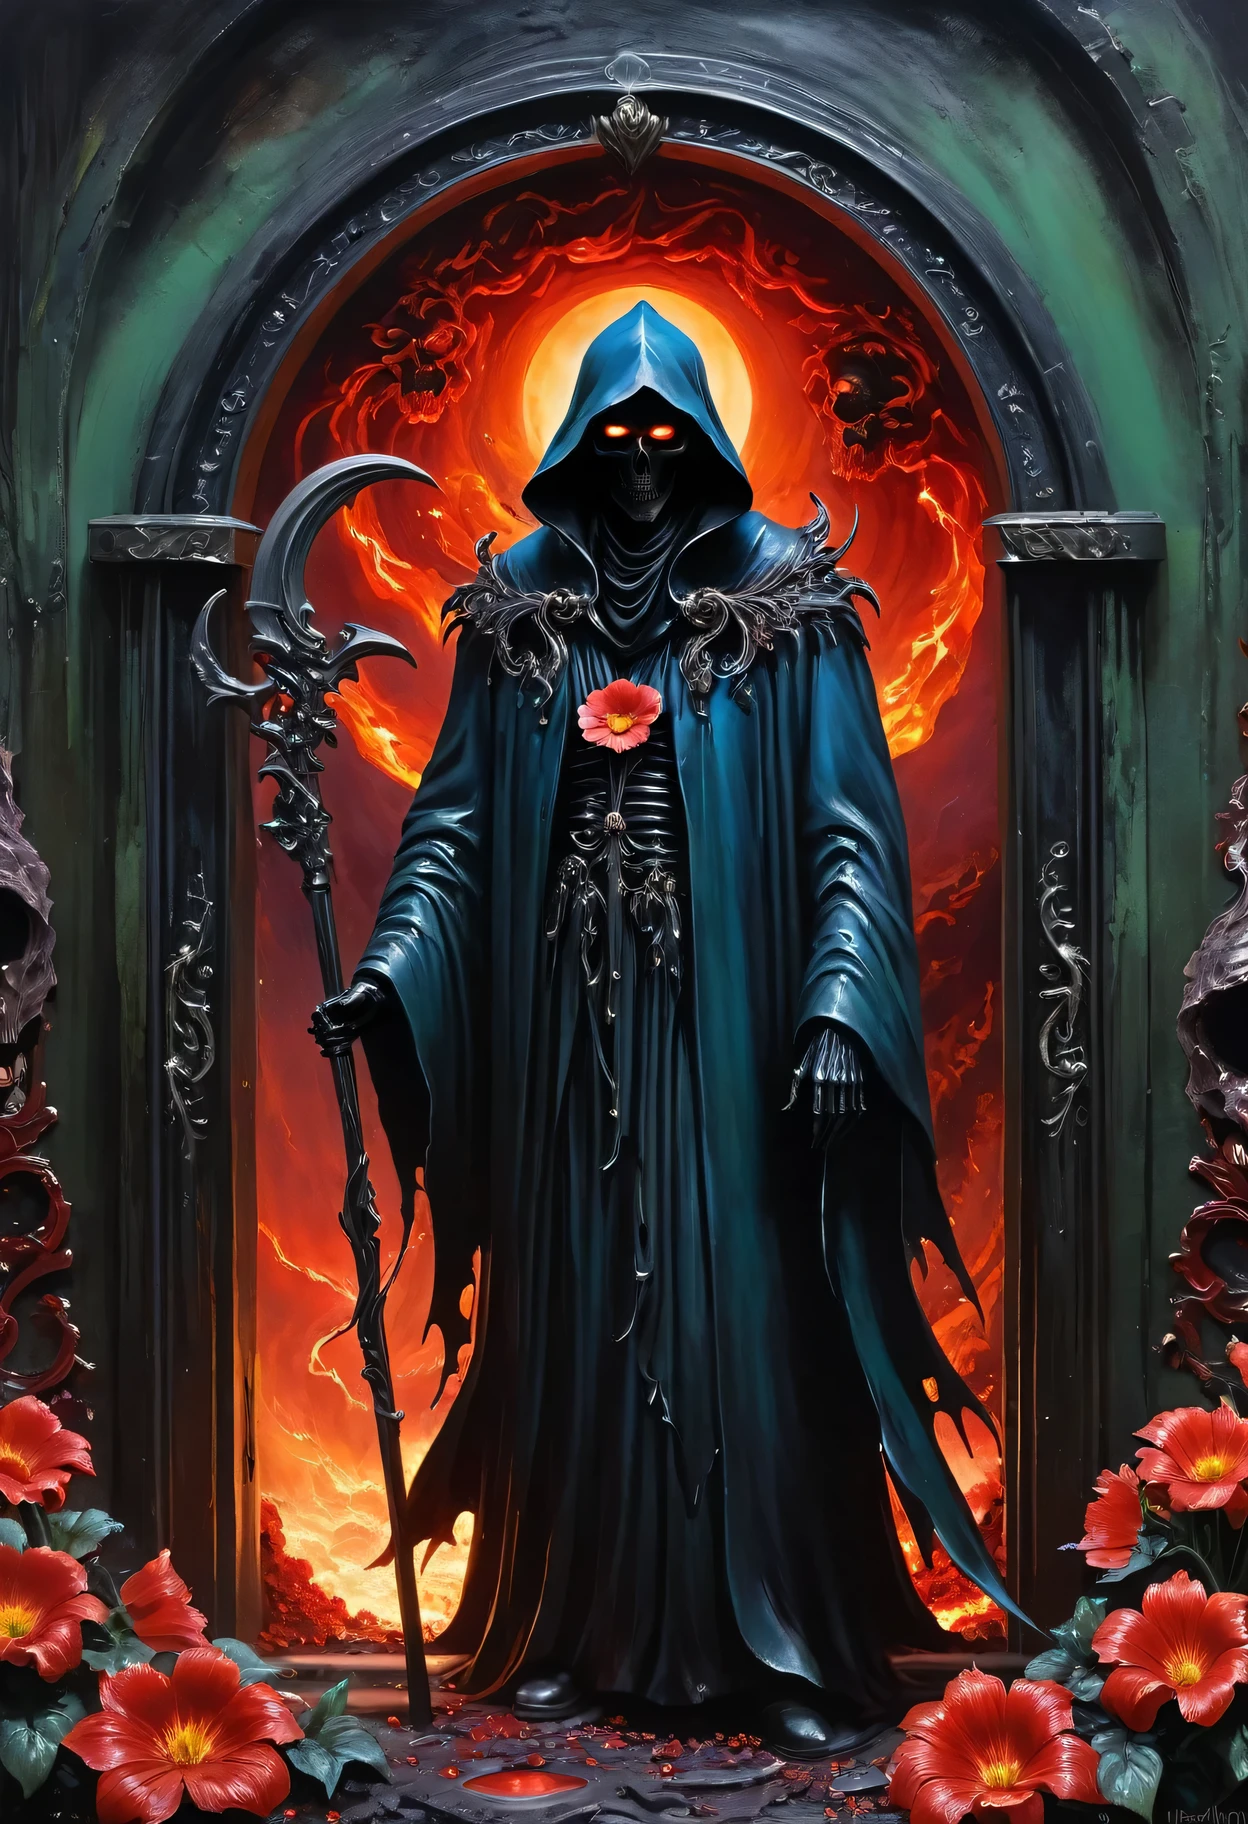 A painting of a Black Grim Reaper standing in front of，Door of hell，Blooming bloody ghost flower，soul，Charm，frivolous，mystery，Heavy Metal Style，Metal Art，The flowers made of iron have a metallic luster，Metal texture in the post-industrial era，Crystal Pendant，Jadeite Inlay，Carefully crafted，Perfect craftsmanship，Blue magic lightning background，Dark fantasy art，Dark fantasy concept art，Bloodborne concept art，Dark Concept Art，Dark Digital Concept Art，Dark fantasy art style，CG Society，Red Blood Art，Realistic Dark Concept Art，Concept Movies，Art in dark fantasy style，Fantasy illustration